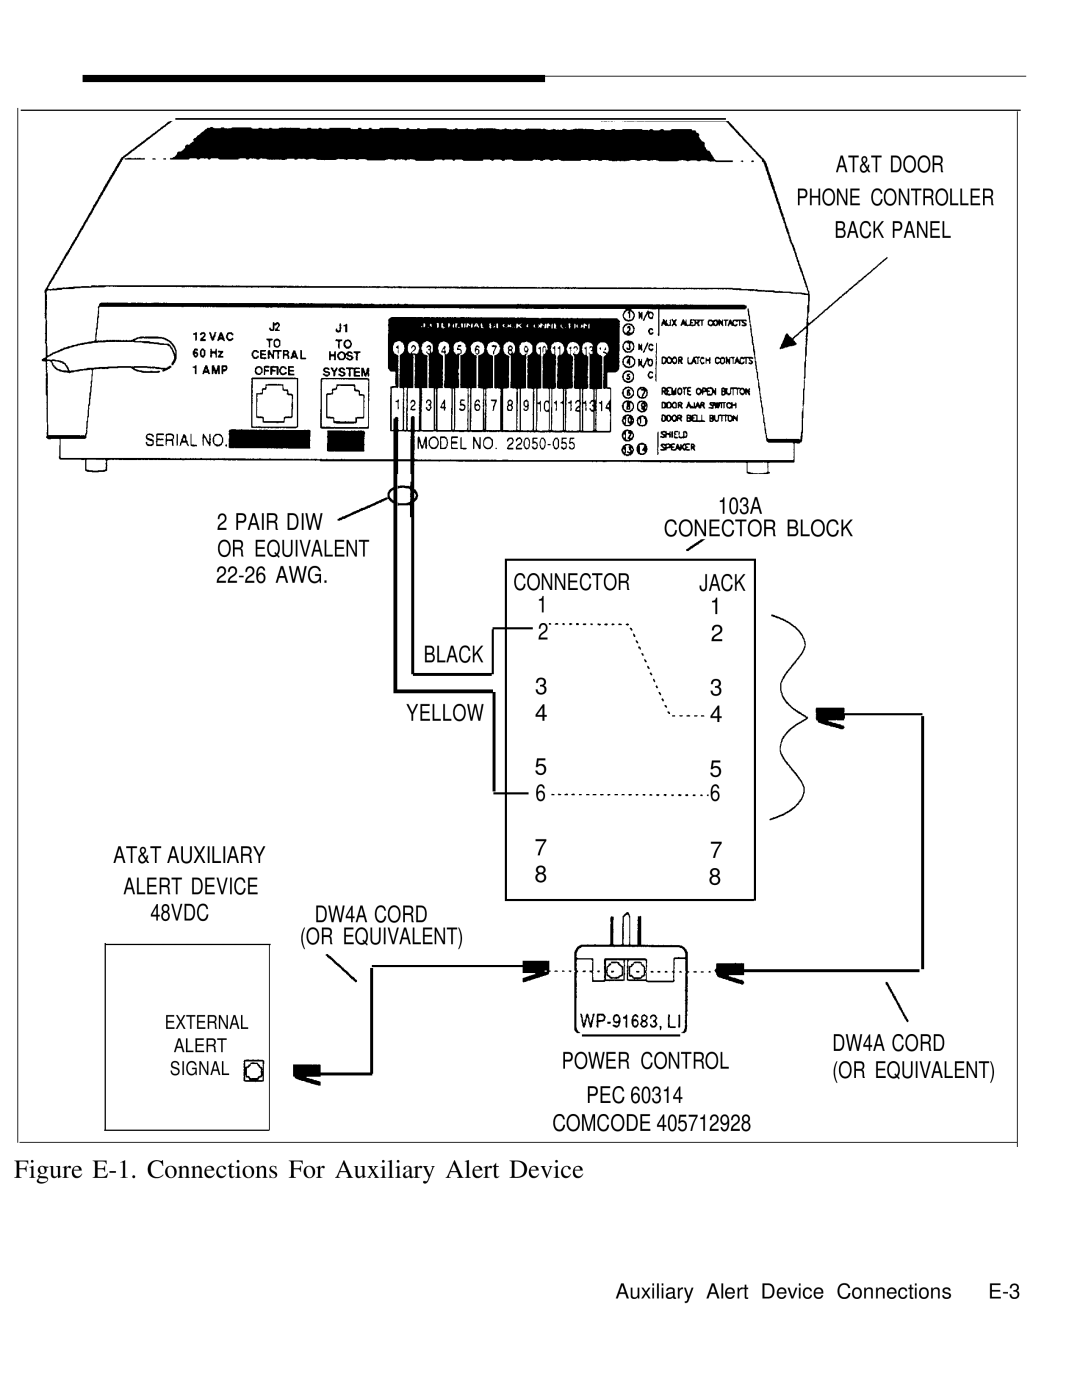 AT&T Door Phone Controller operation manual Figure E-1. Connections For Auxiliary Alert Device 